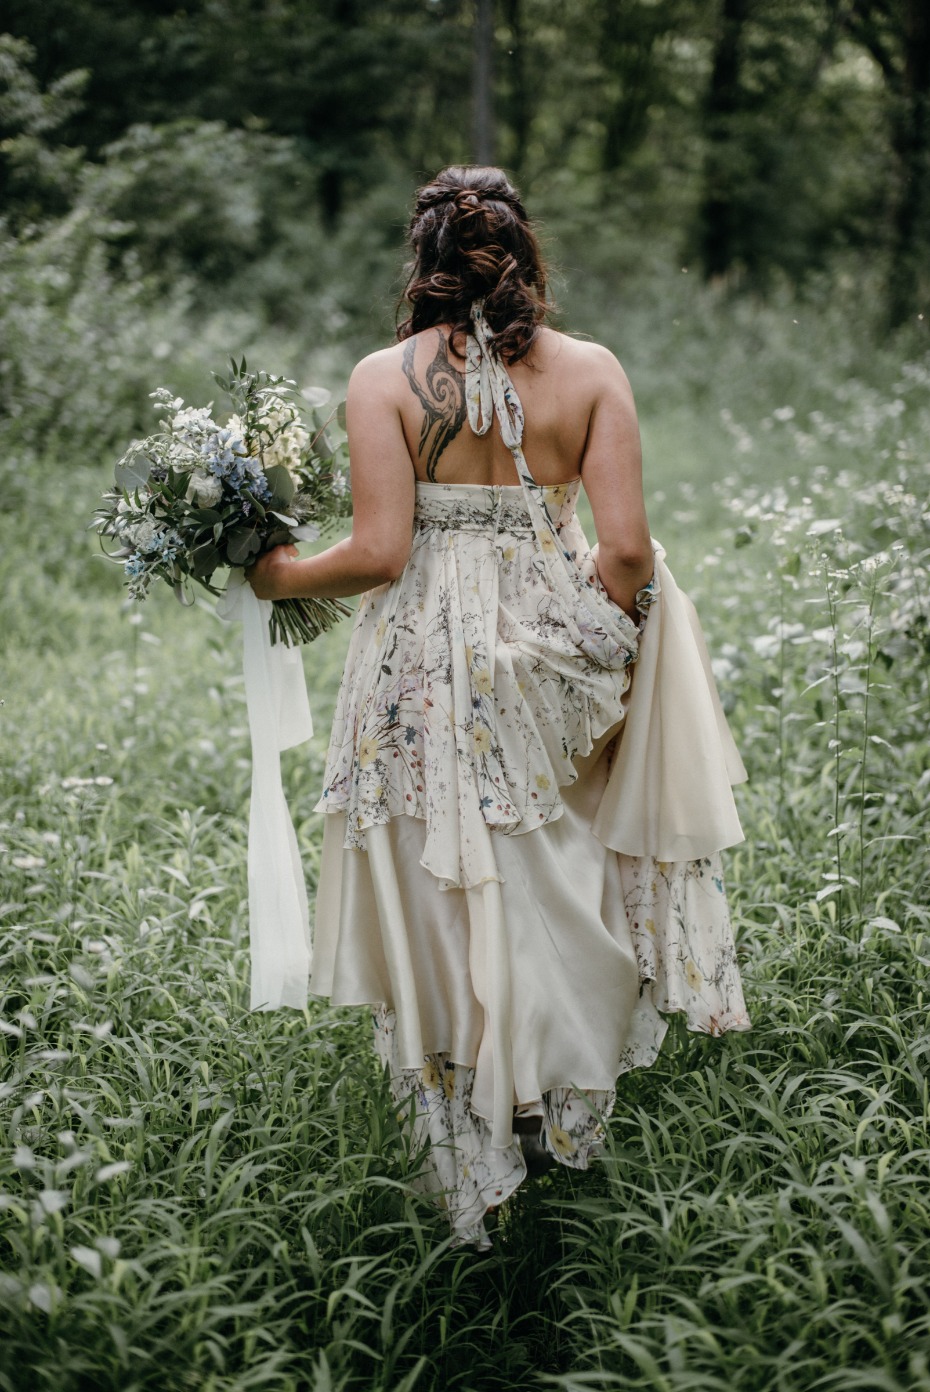 Non-traditional wedding dress for the outdoorsy bride